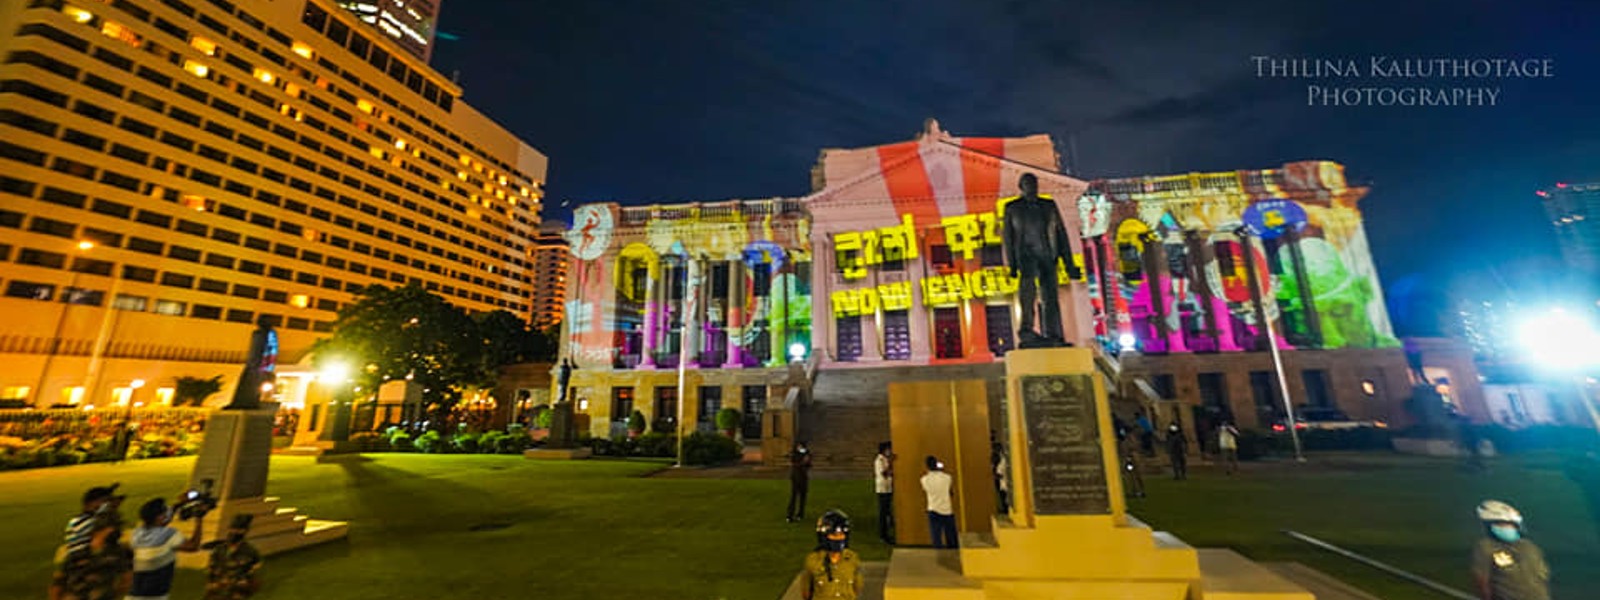 Projection mapping lights up President's Office